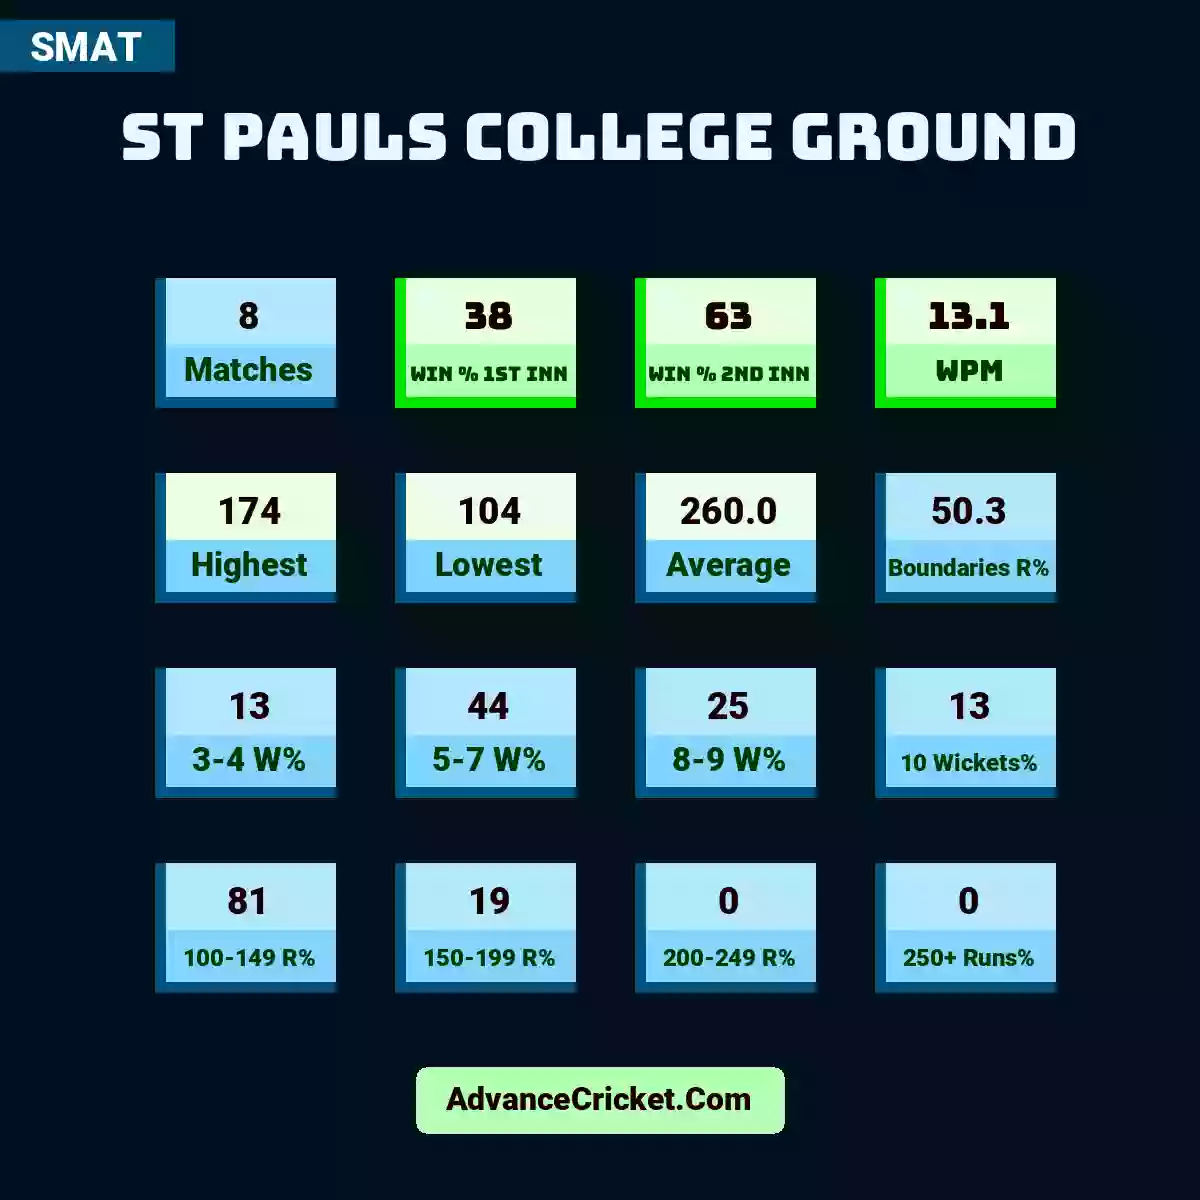 Image showing St Pauls College Ground with Matches: 8, Win % 1st Inn: 38, Win % 2nd Inn: 63, WPM: 13.1, Highest: 174, Lowest: 104, Average: 260.0, Boundaries R%: 50.3, 3-4 W%: 13, 5-7 W%: 44, 8-9 W%: 25, 10 Wickets%: 13, 100-149 R%: 81, 150-199 R%: 19, 200-249 R%: 0, 250+ Runs%: 0.